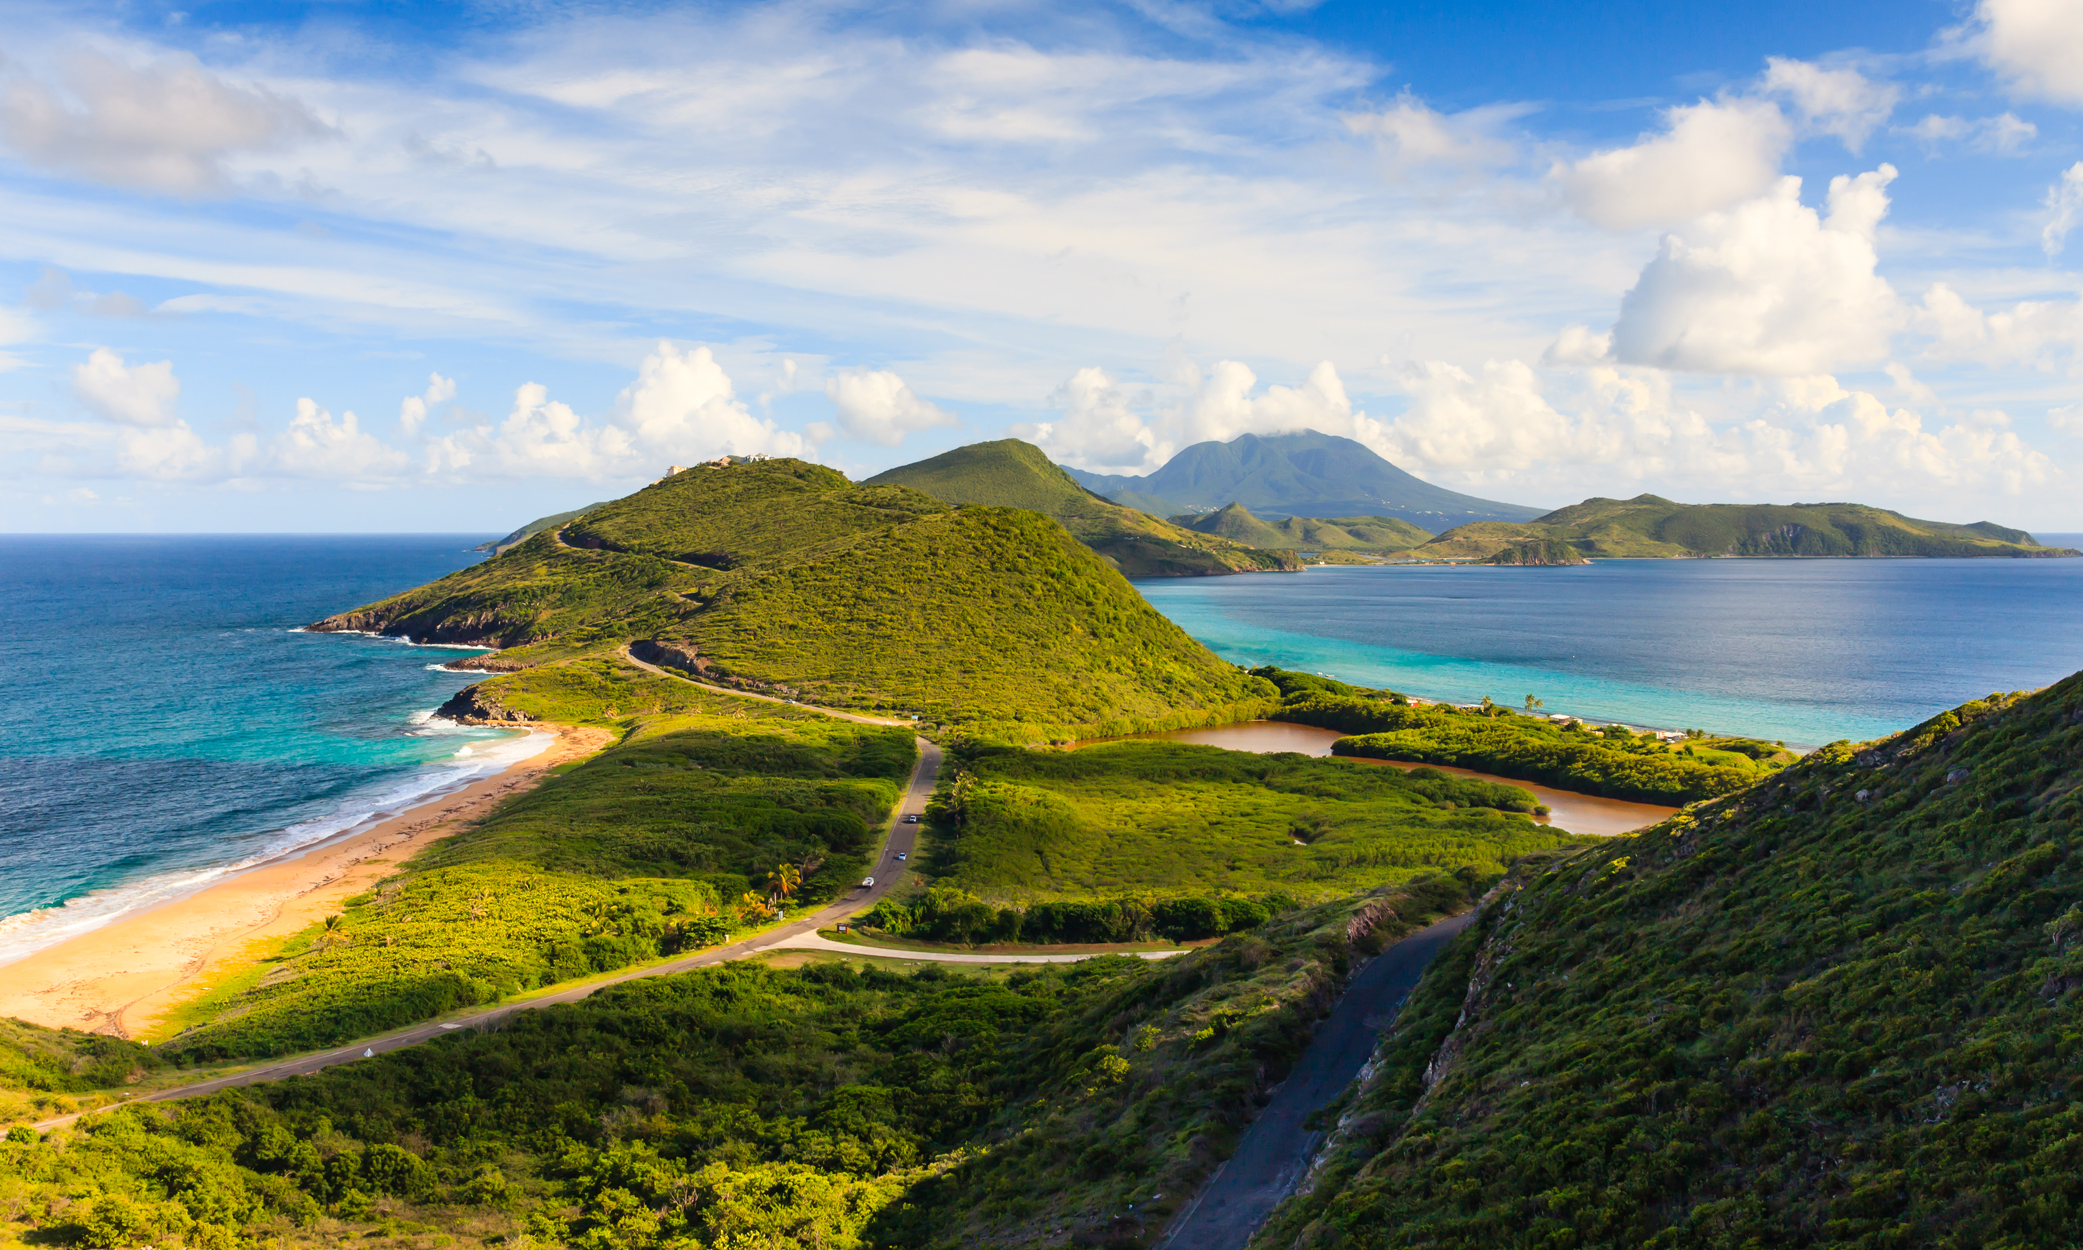 Saint Kitts and Nevis citizenship by investment is the world's oldest CBI programme.